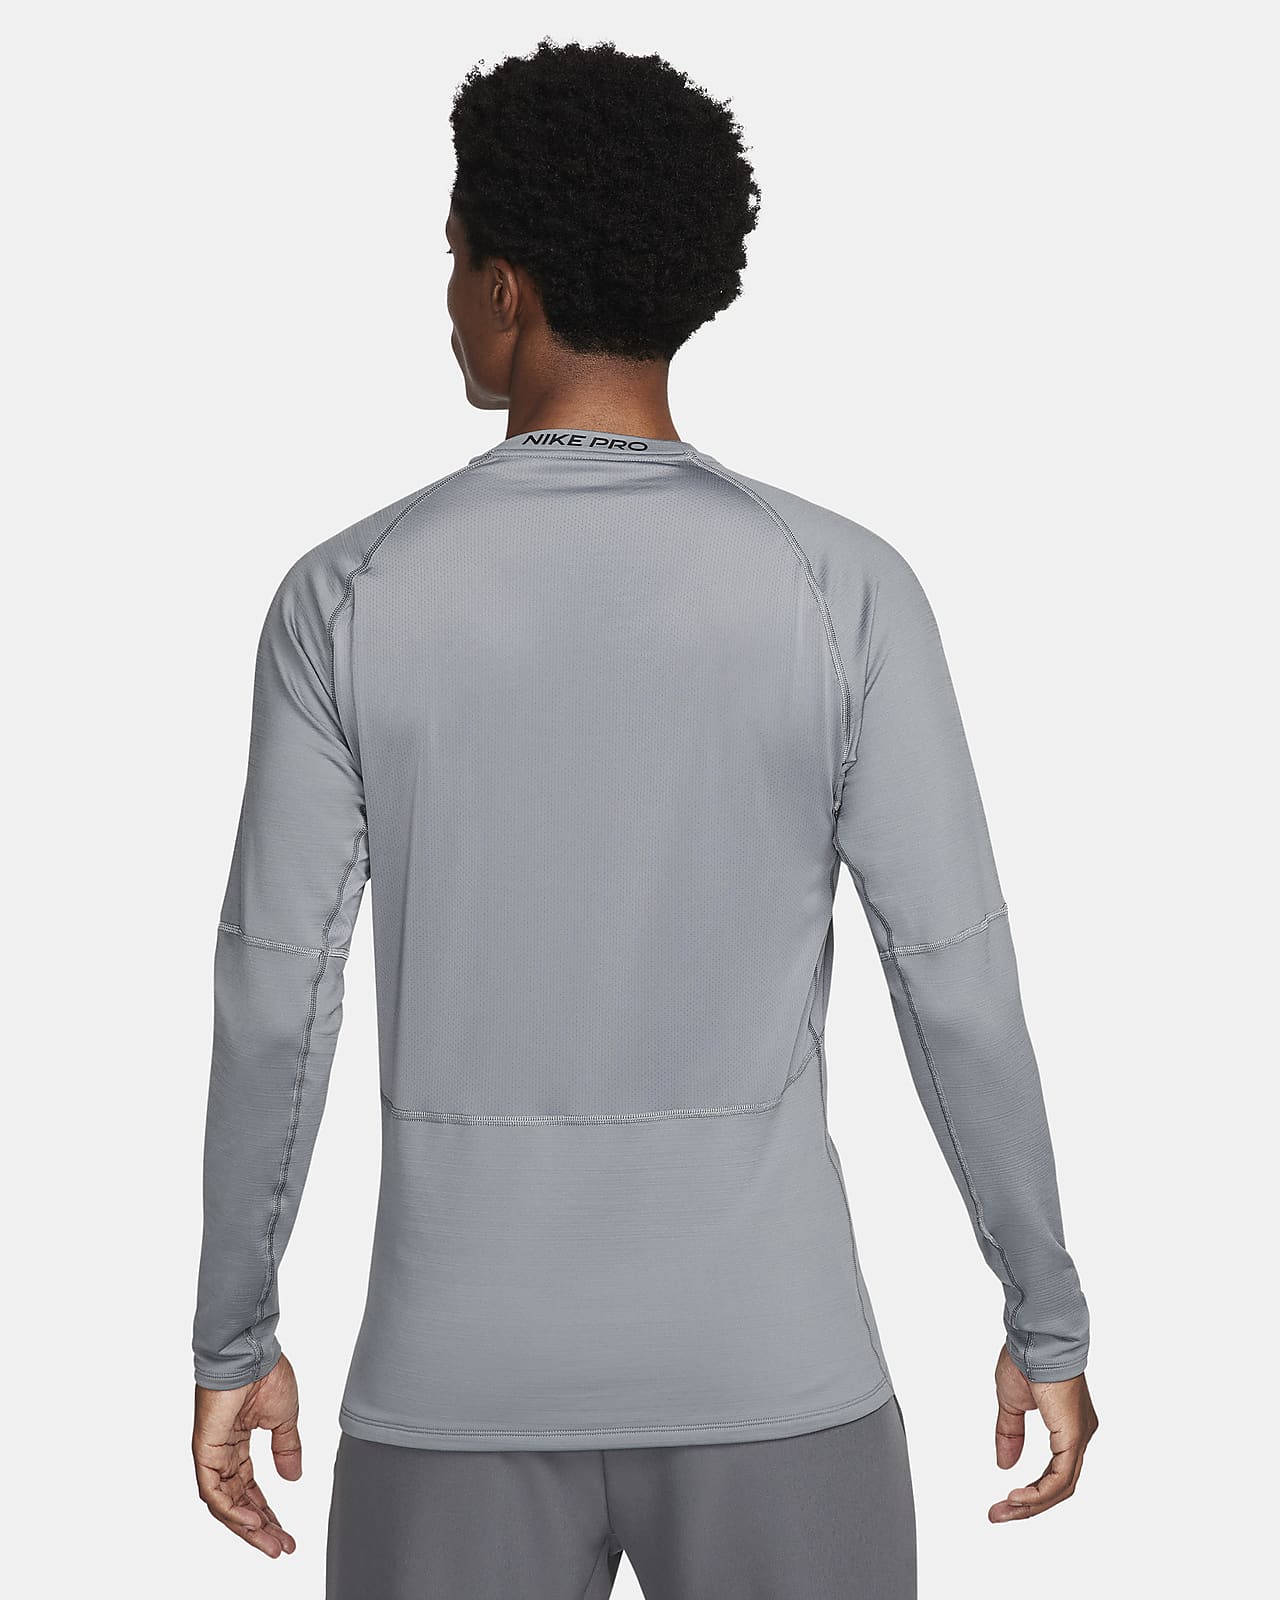 Nike Pro Hypercool Grey and Black Space dyed Neutral mesh athletic